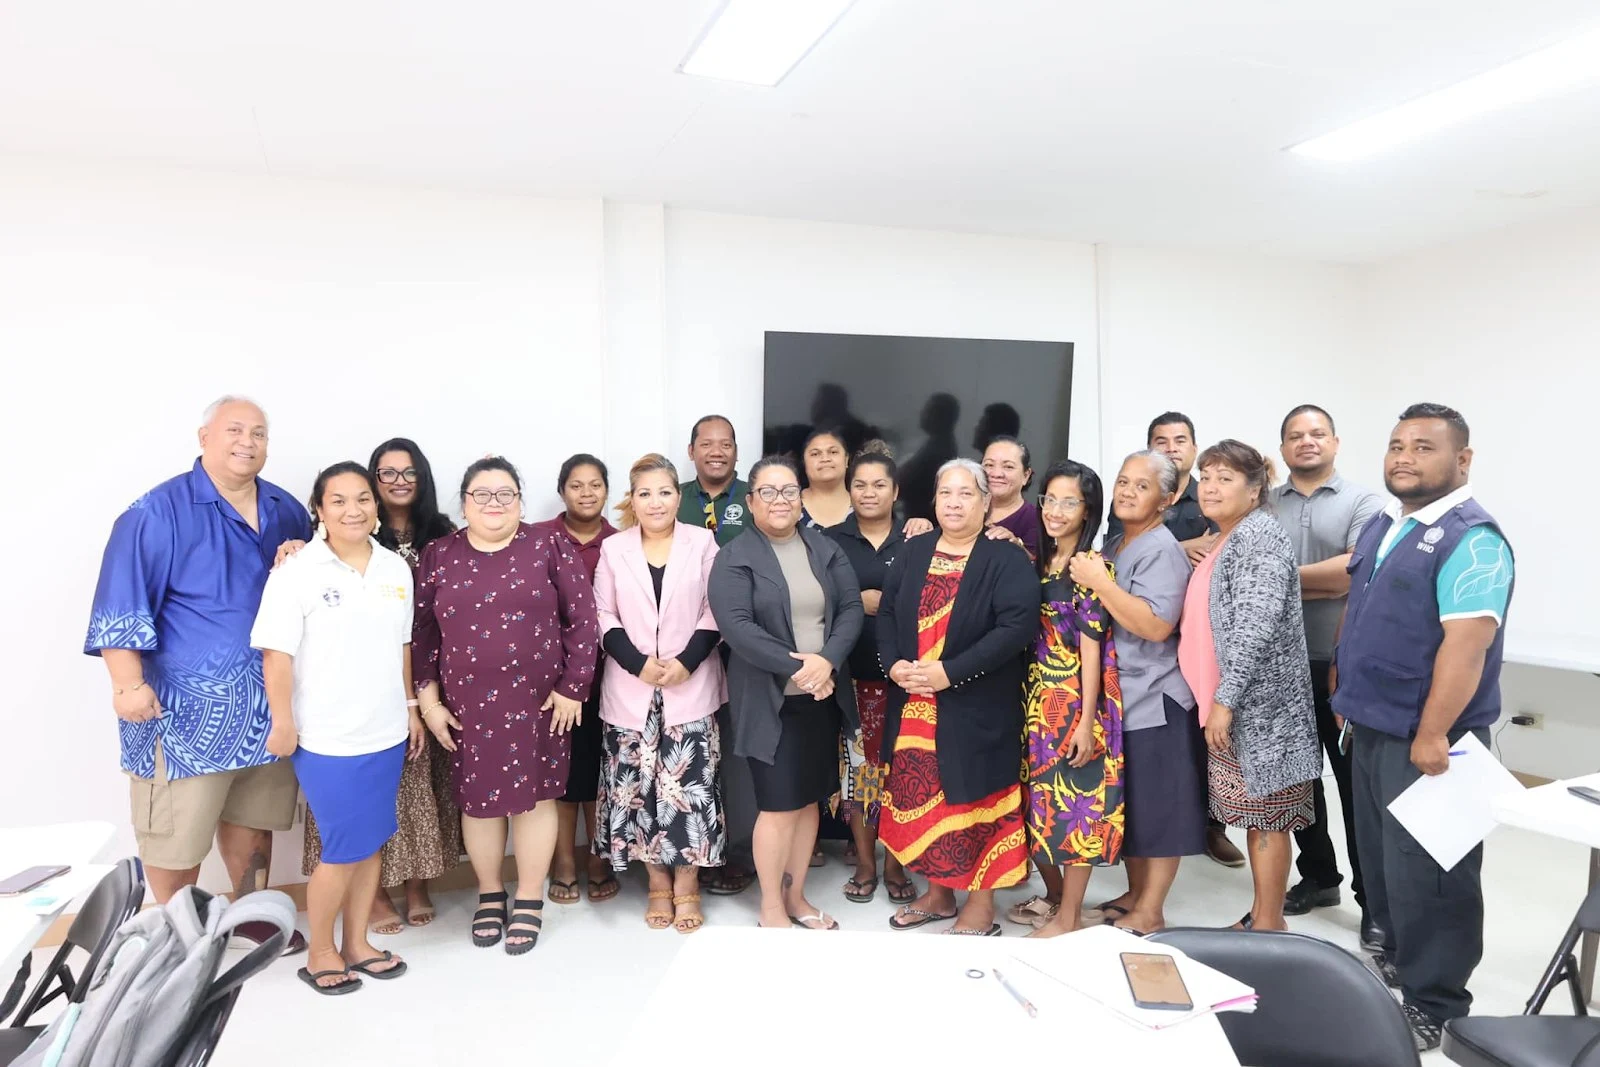 PACIFIC ISLAND HEALTH OFFICERS ASSOCIATION (PIHOA) FACILITATES GRANT MANAGEMENT TRAINING FOR MINISTRY OF HEALTH MANAGEMENT